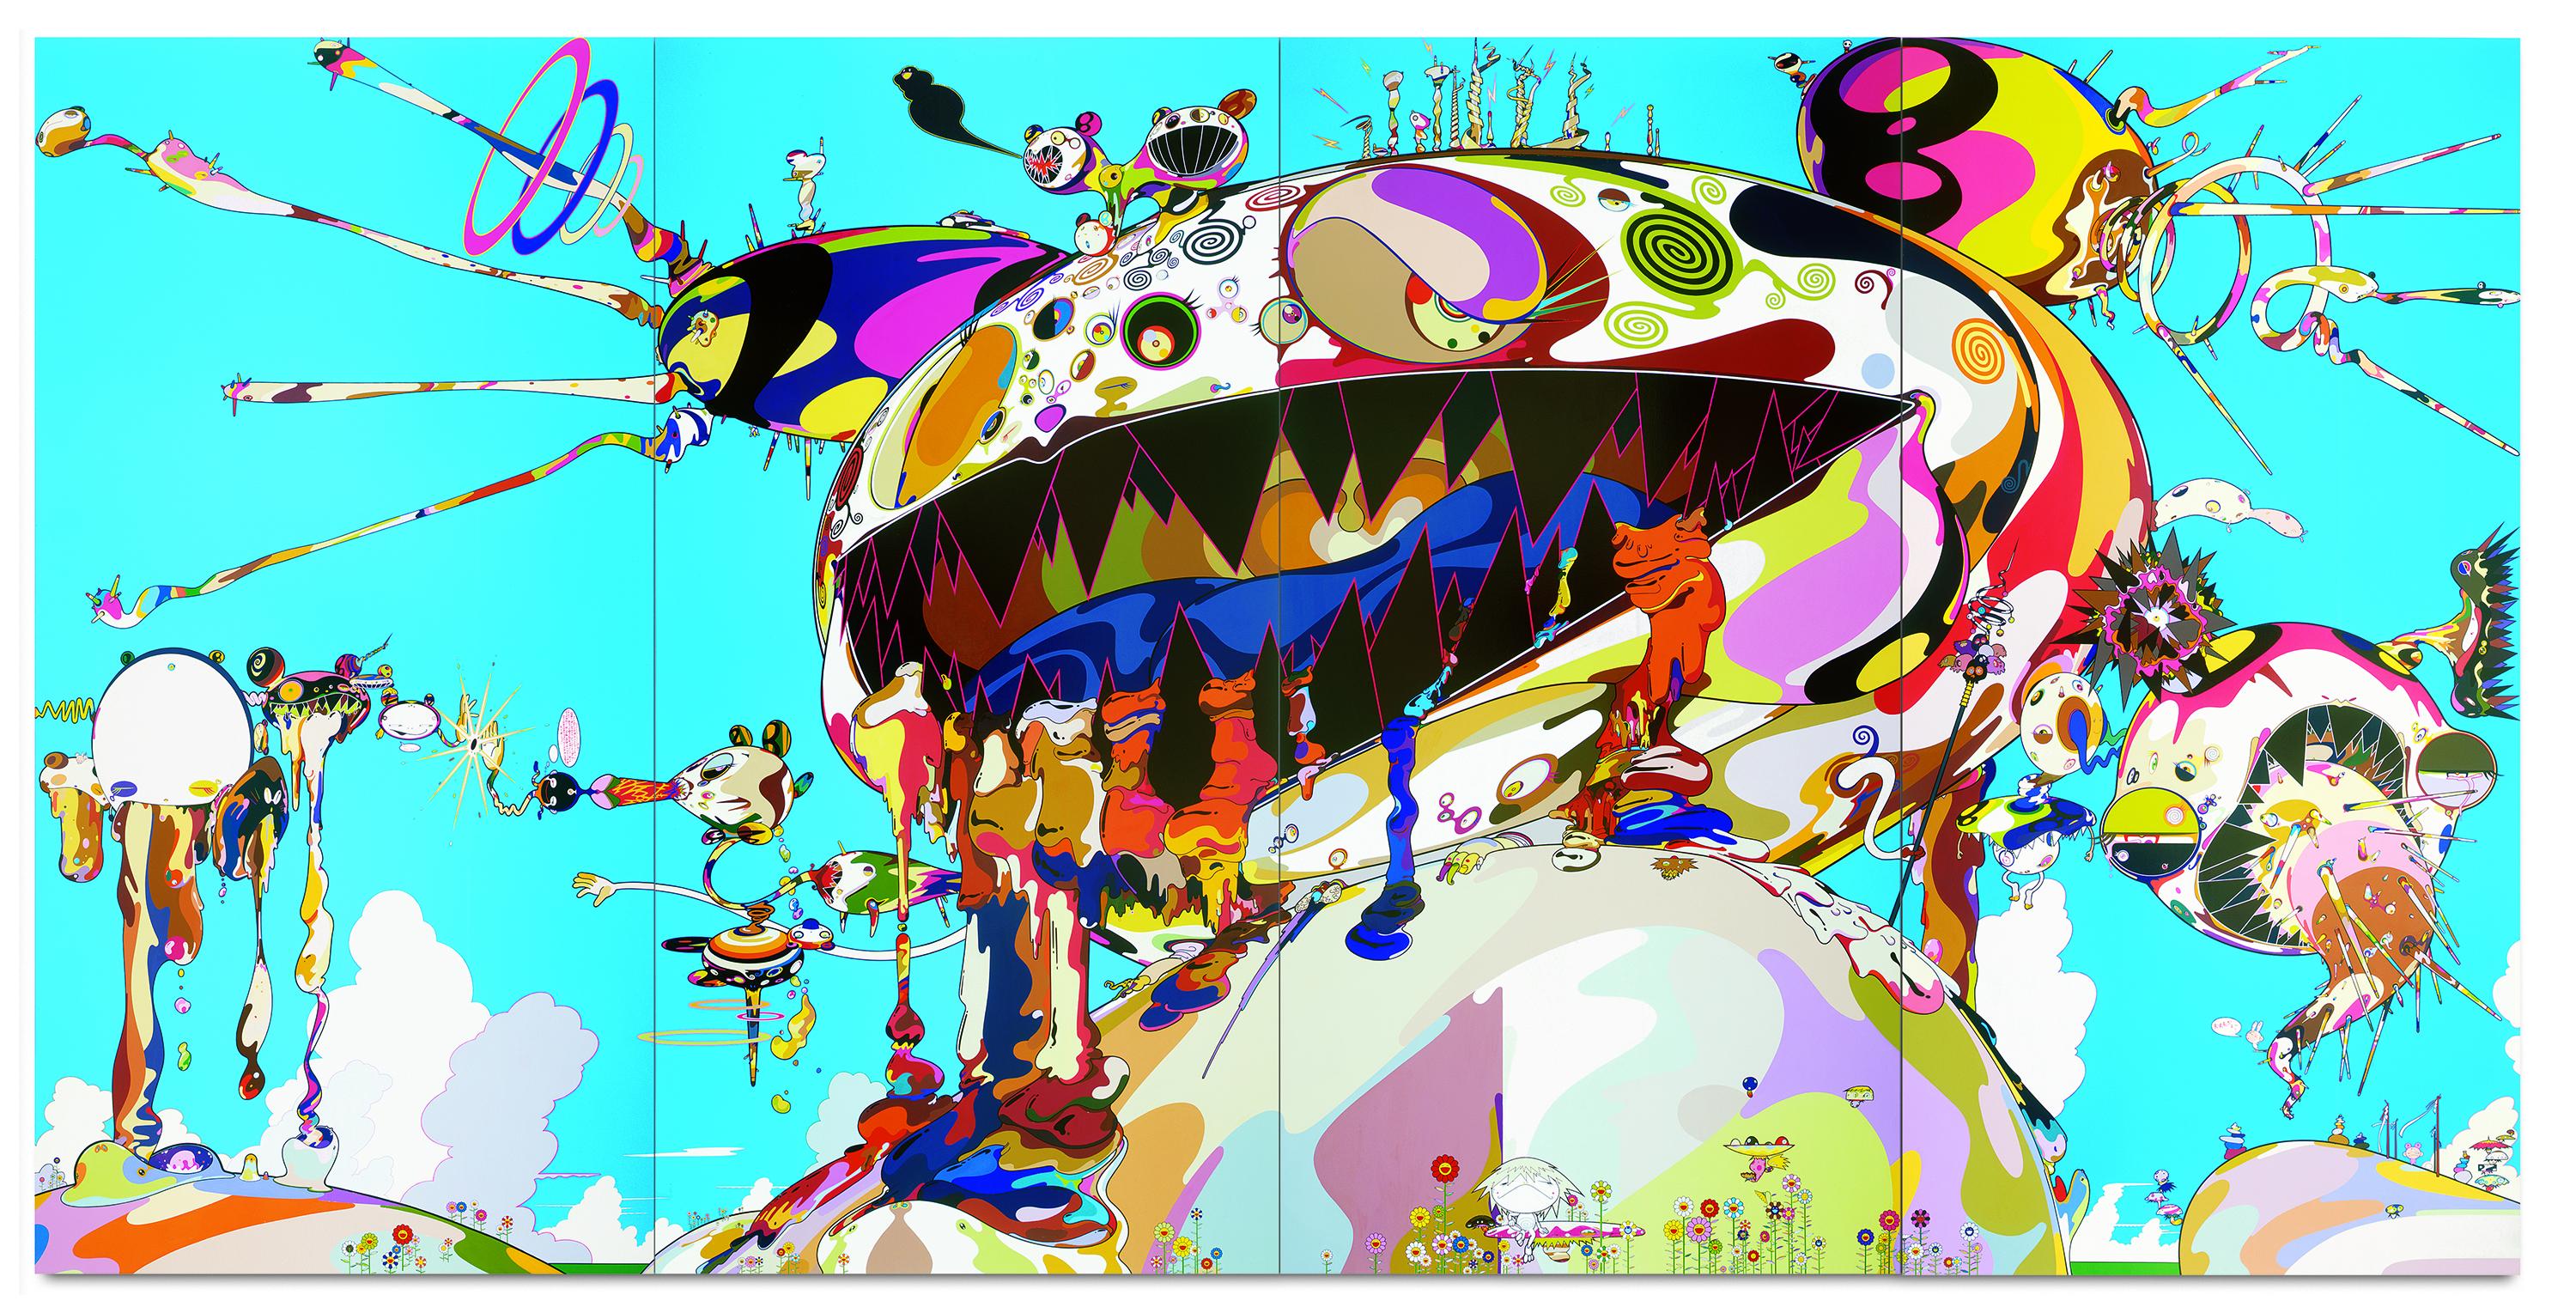 A brightly colored landscape with a giant multi-colored humunculous sitting on top of a hill, its open mouth revealing jagged teeth, seeping fluids while pustules explode from other parts of its ovoid head.